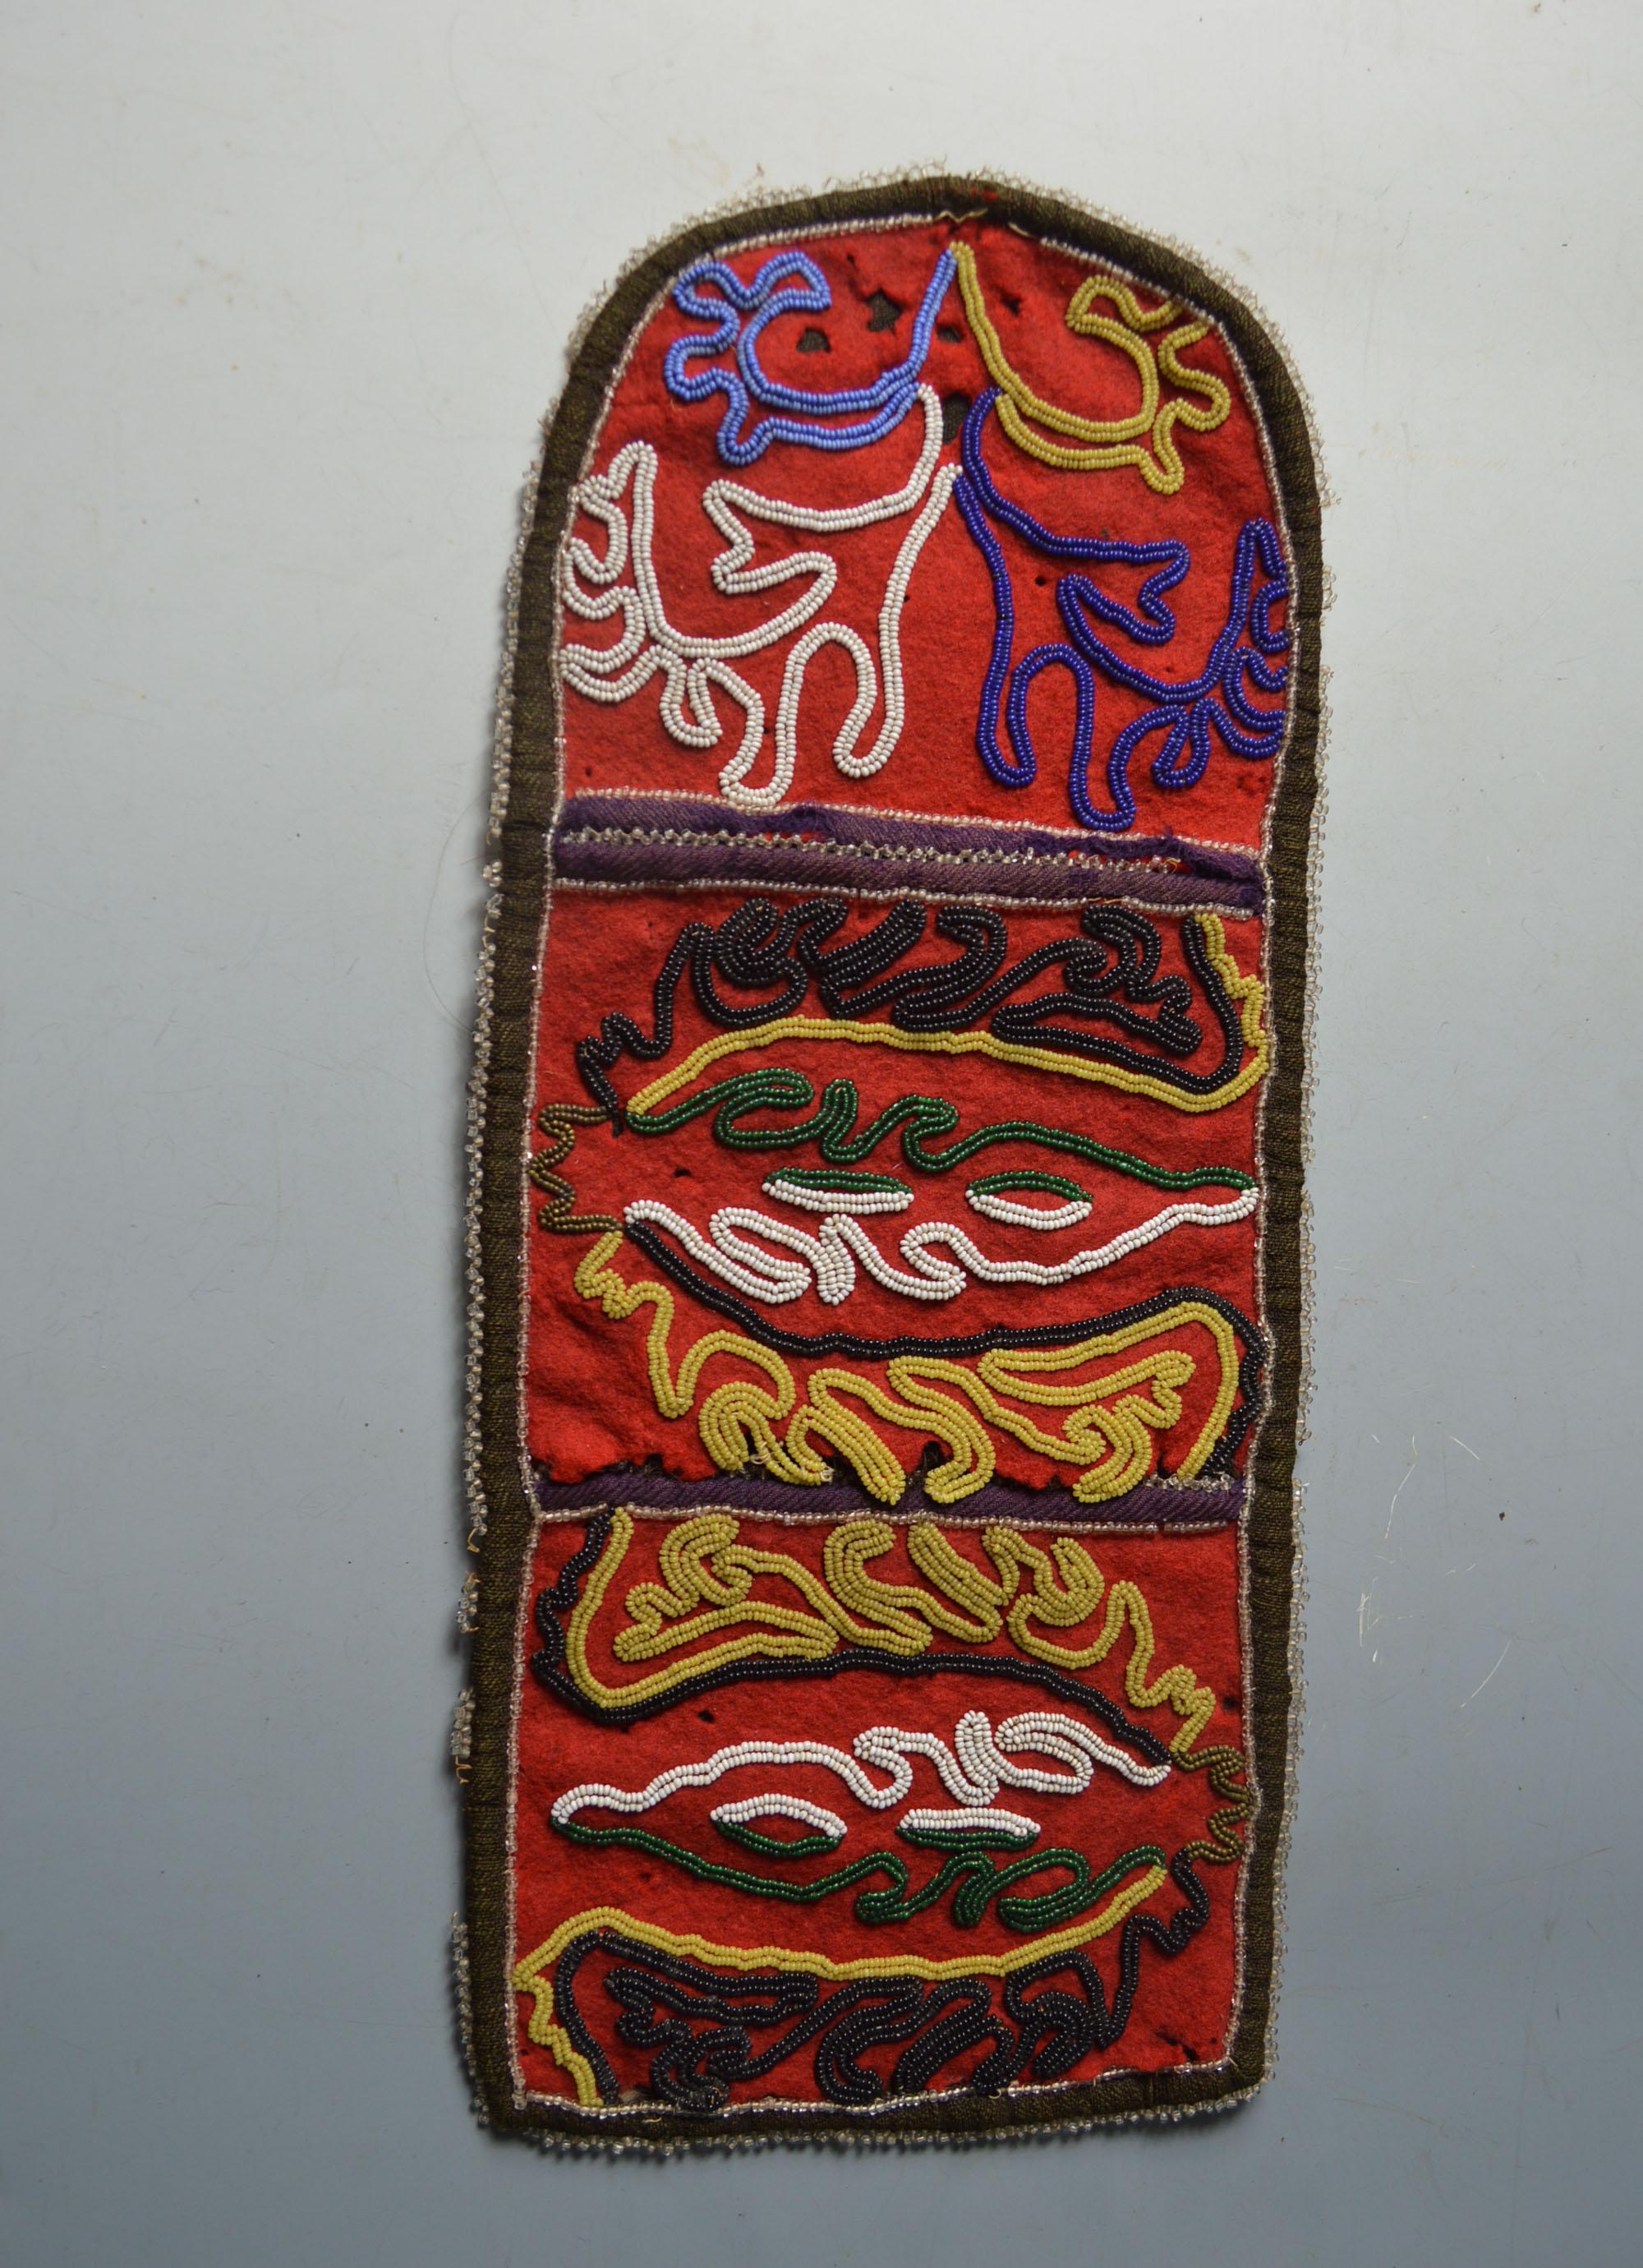 Woven Native American Tlingit Beaded Pouch or Wall Pocket